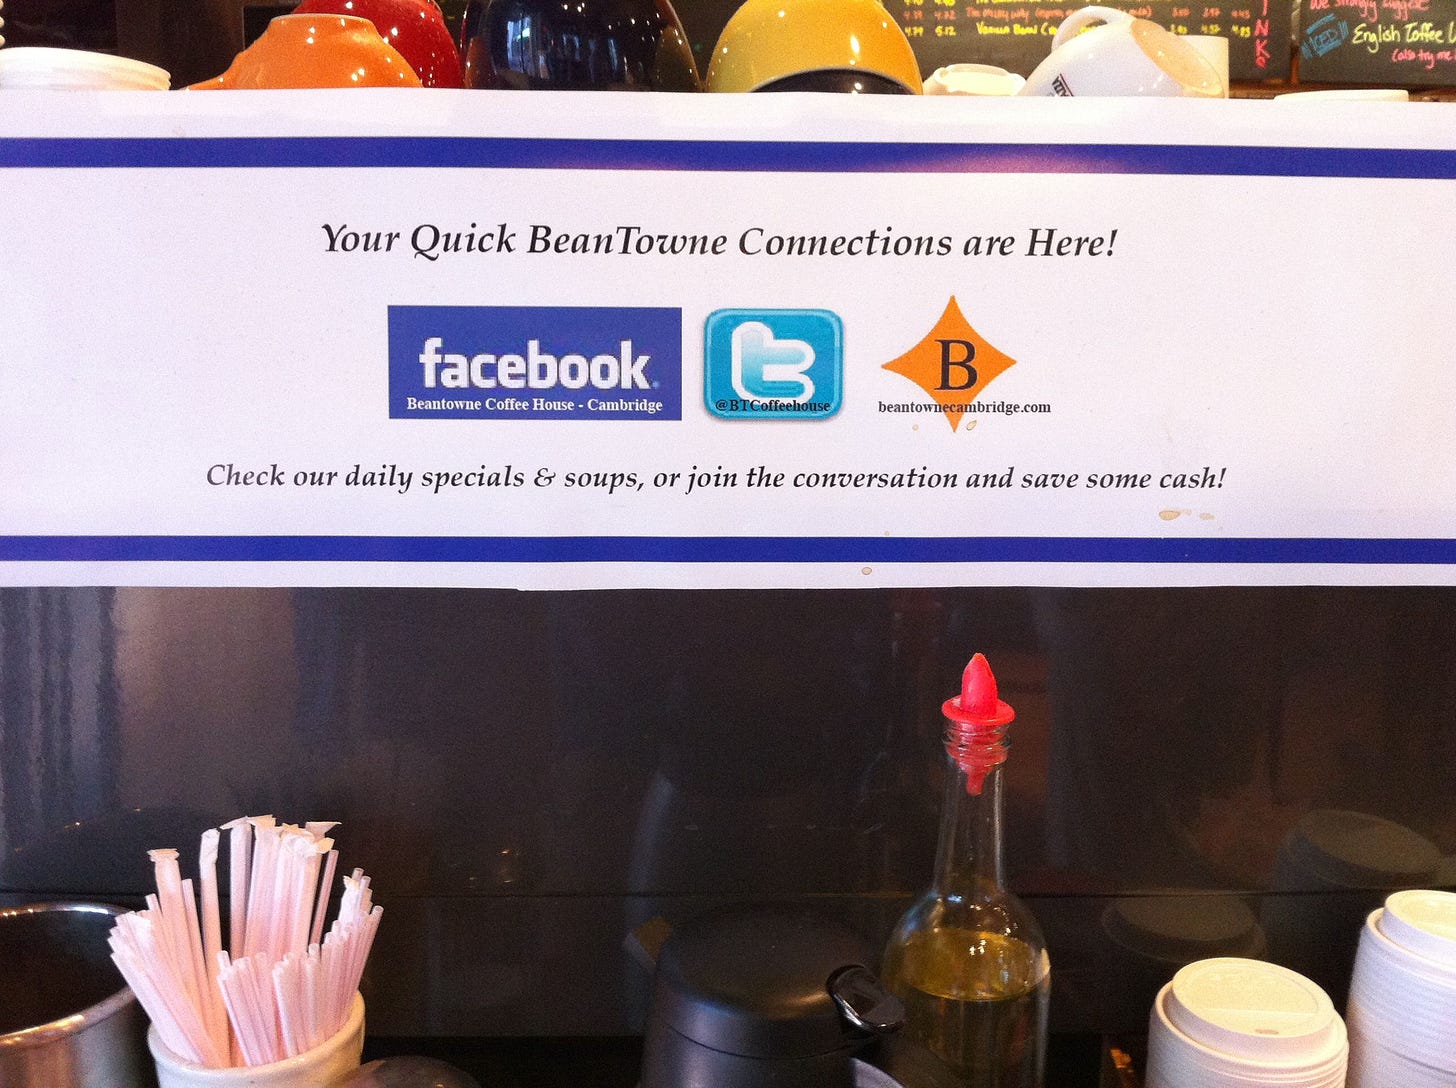 A photo of a sign in a coffee shop featuring the logos for Facebook and Twitter.